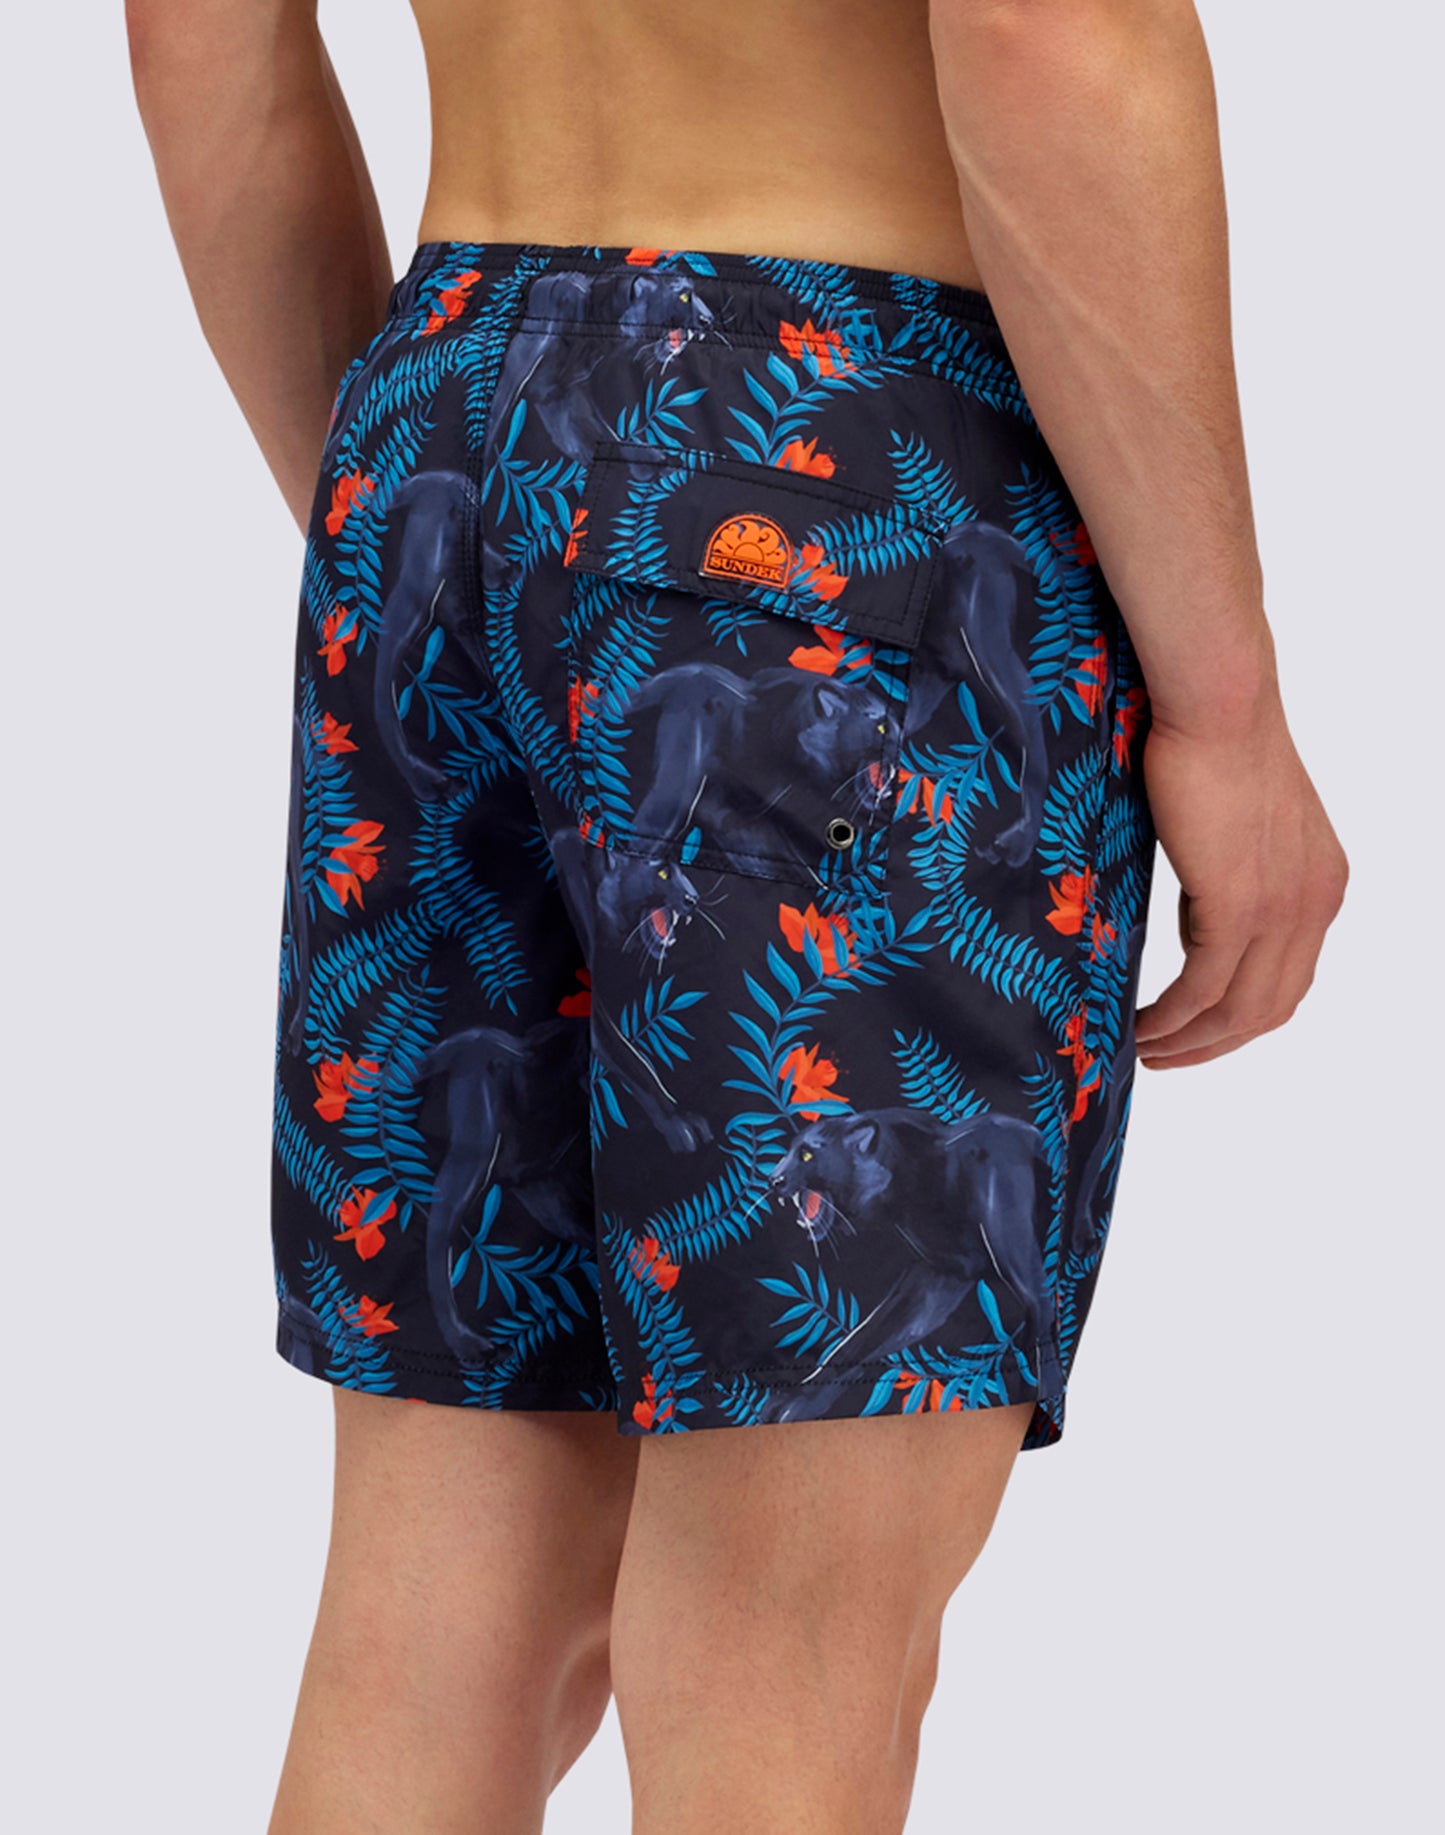 PANTHER PRINT MEDIUM SWIMSHORTS IN RECYCLED POLY